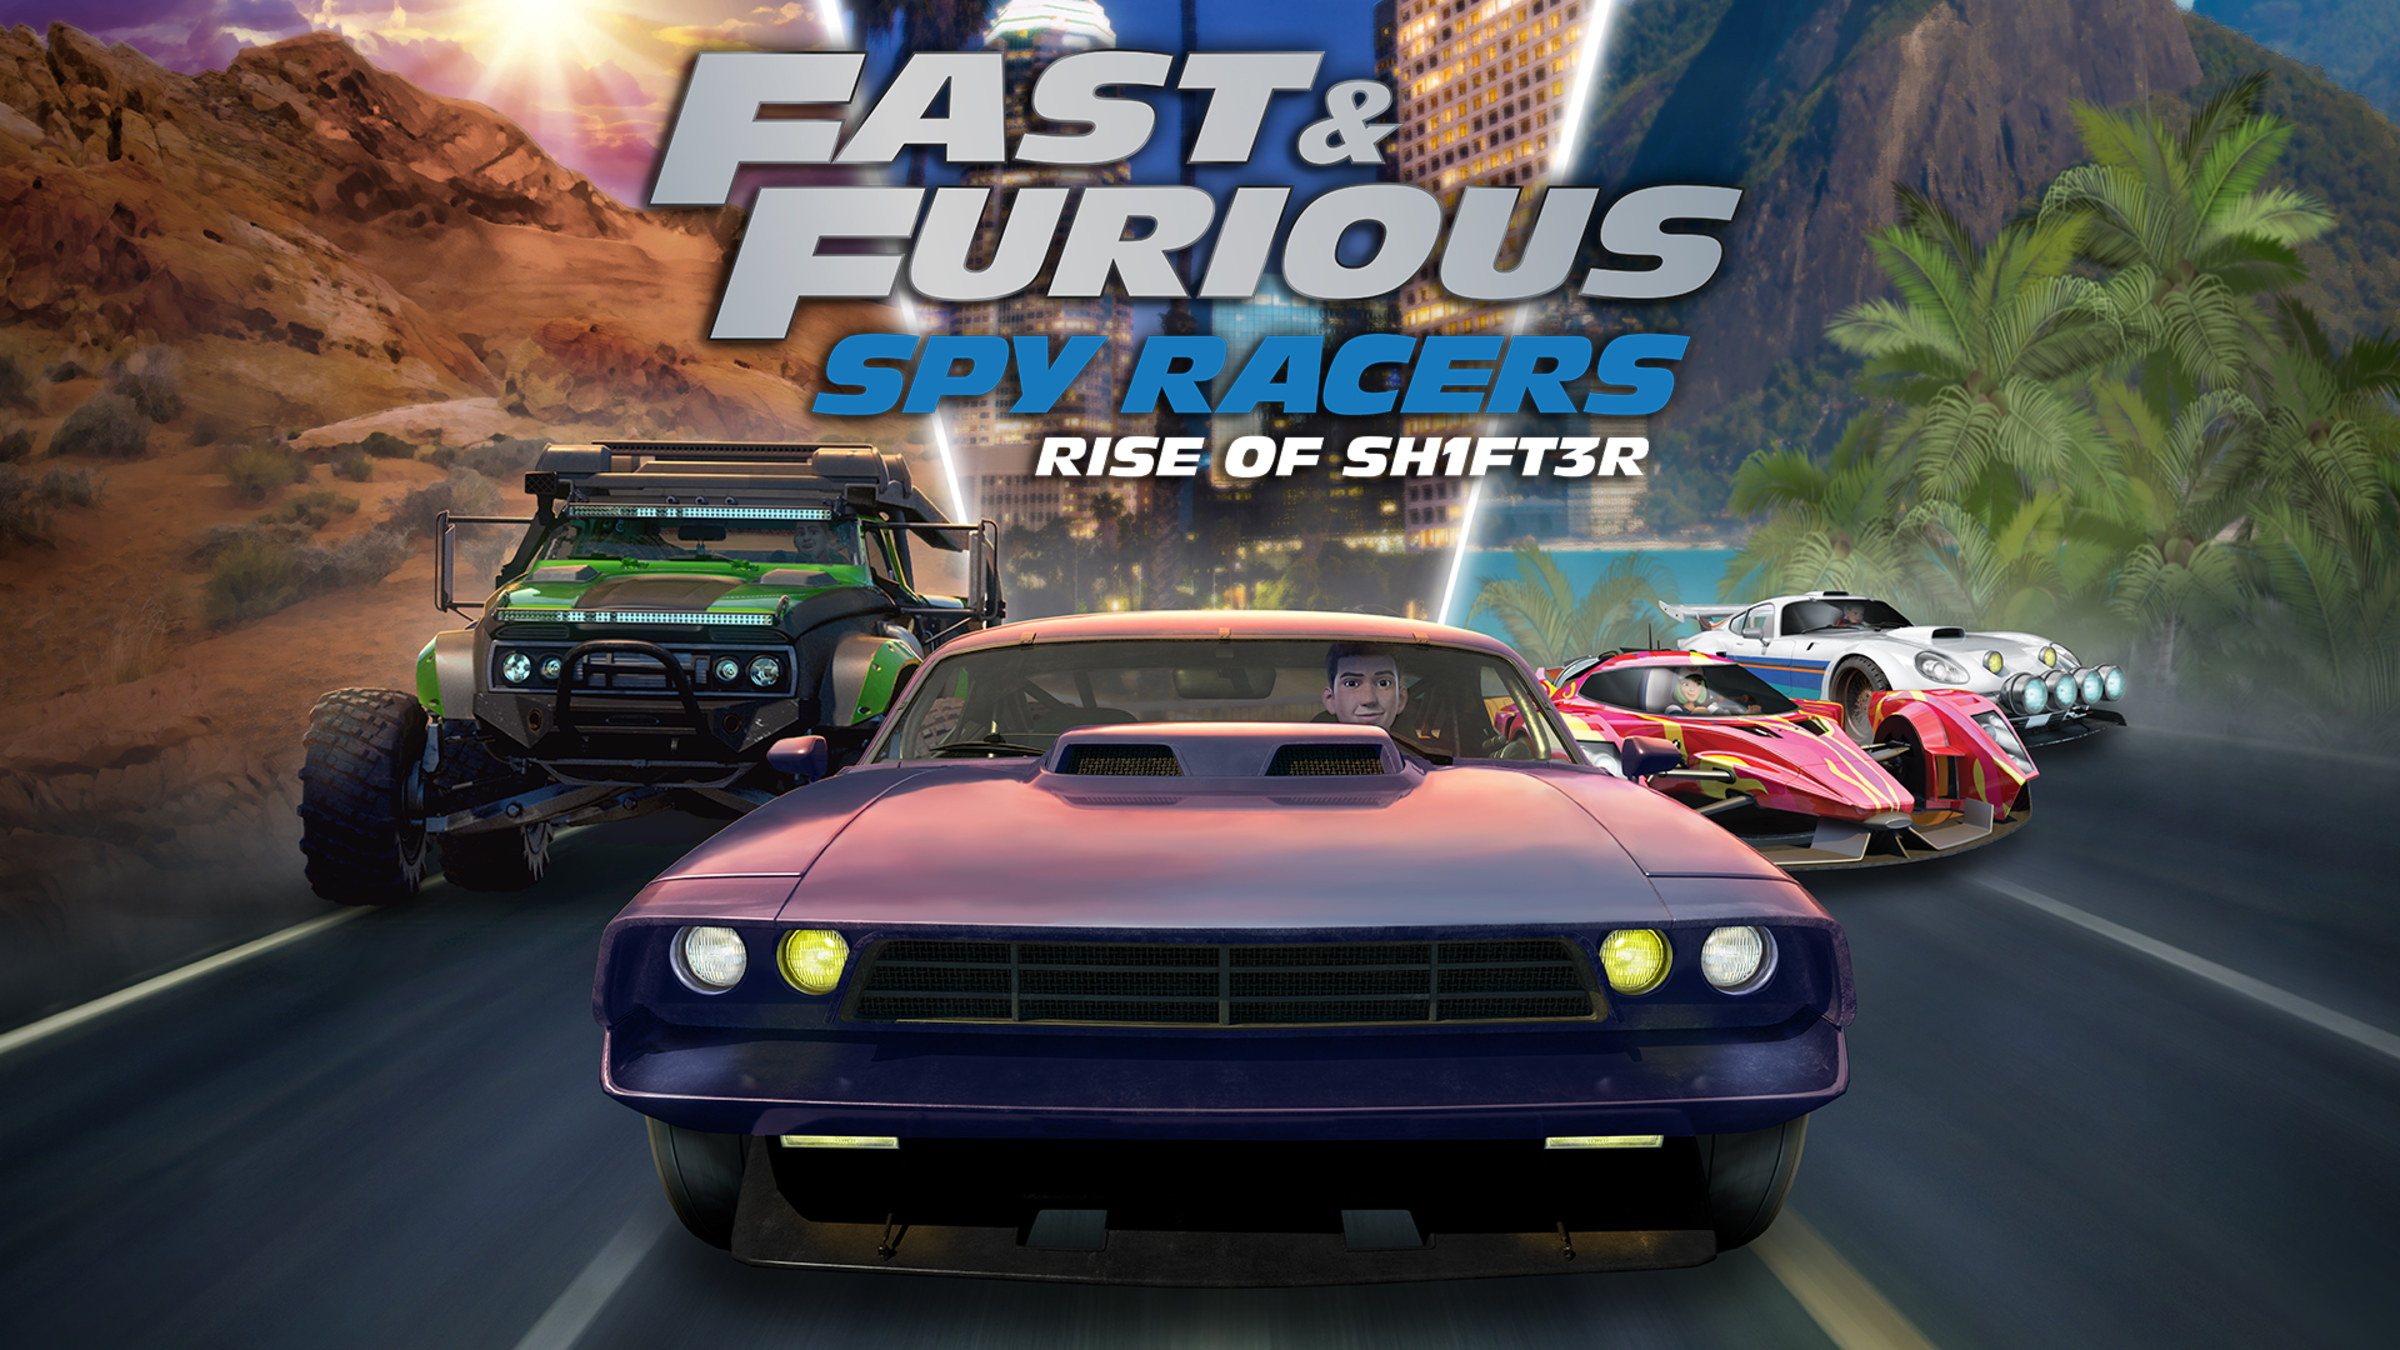 fast-furious-spy-racers-rise-of-sh1ft3r-for-nintendo-switch